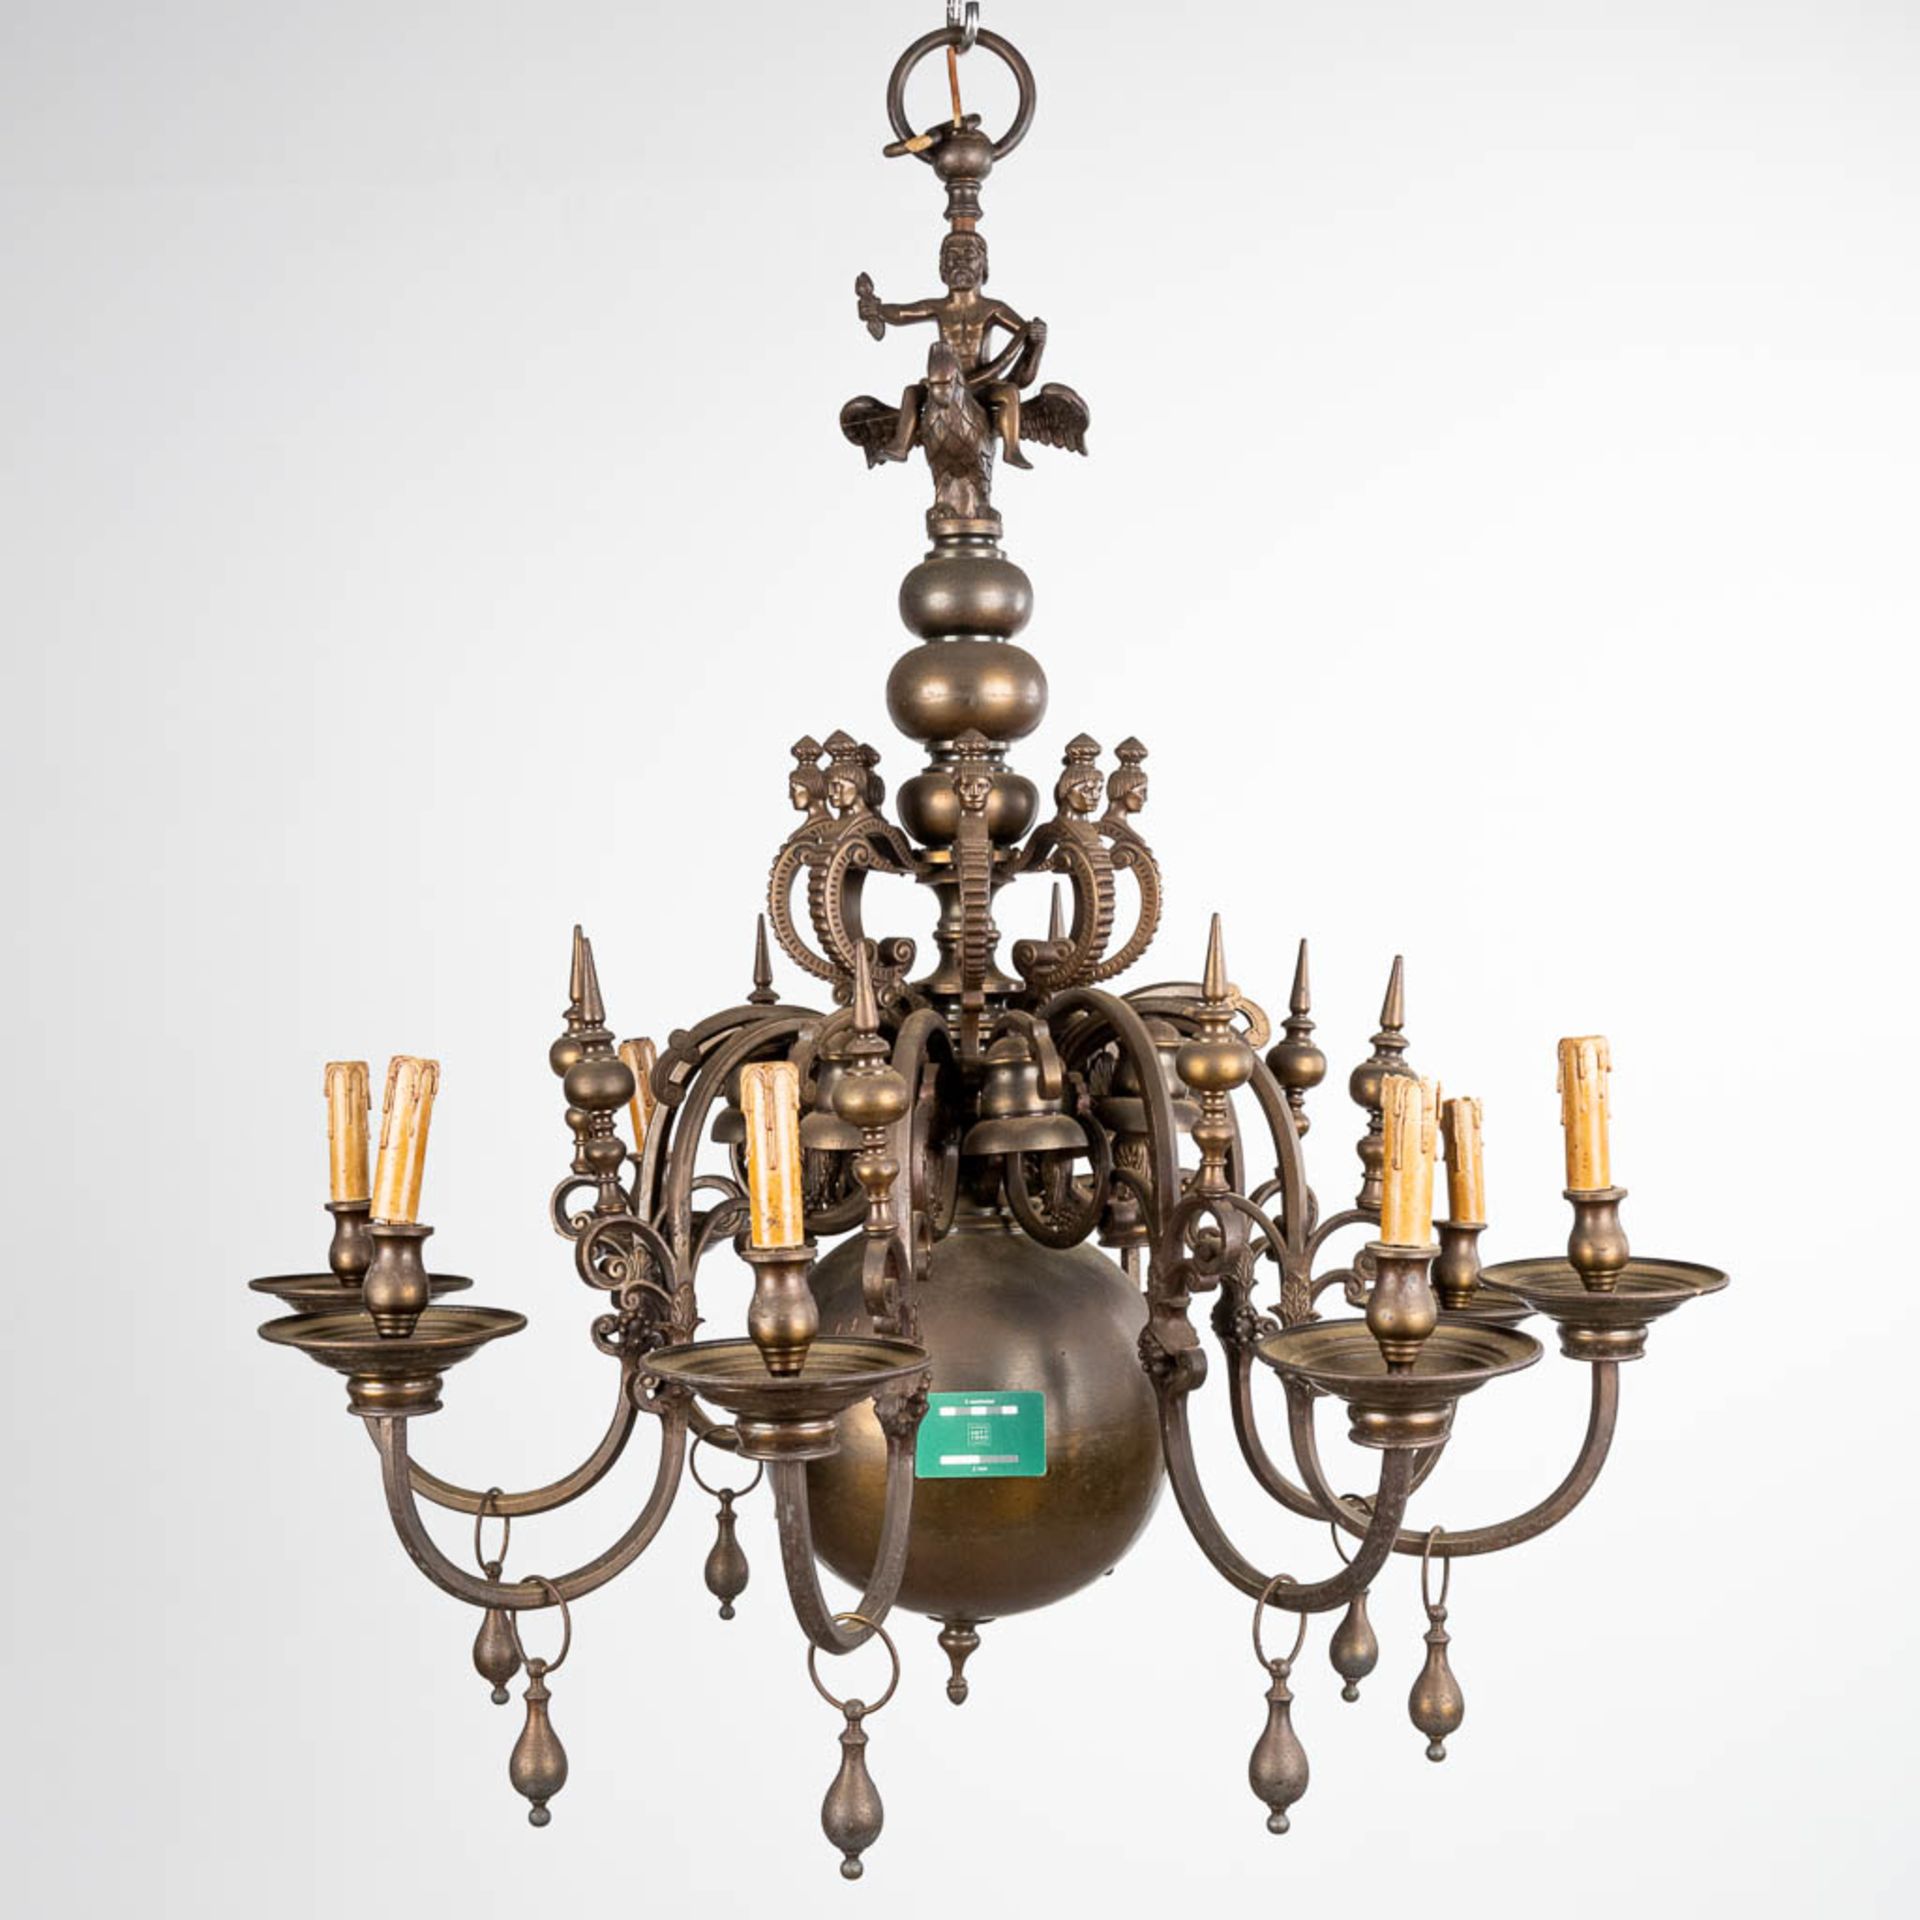 A large Flemish chandelier made of bronze, decorated with a figurine riding a mythological creature. - Bild 2 aus 11